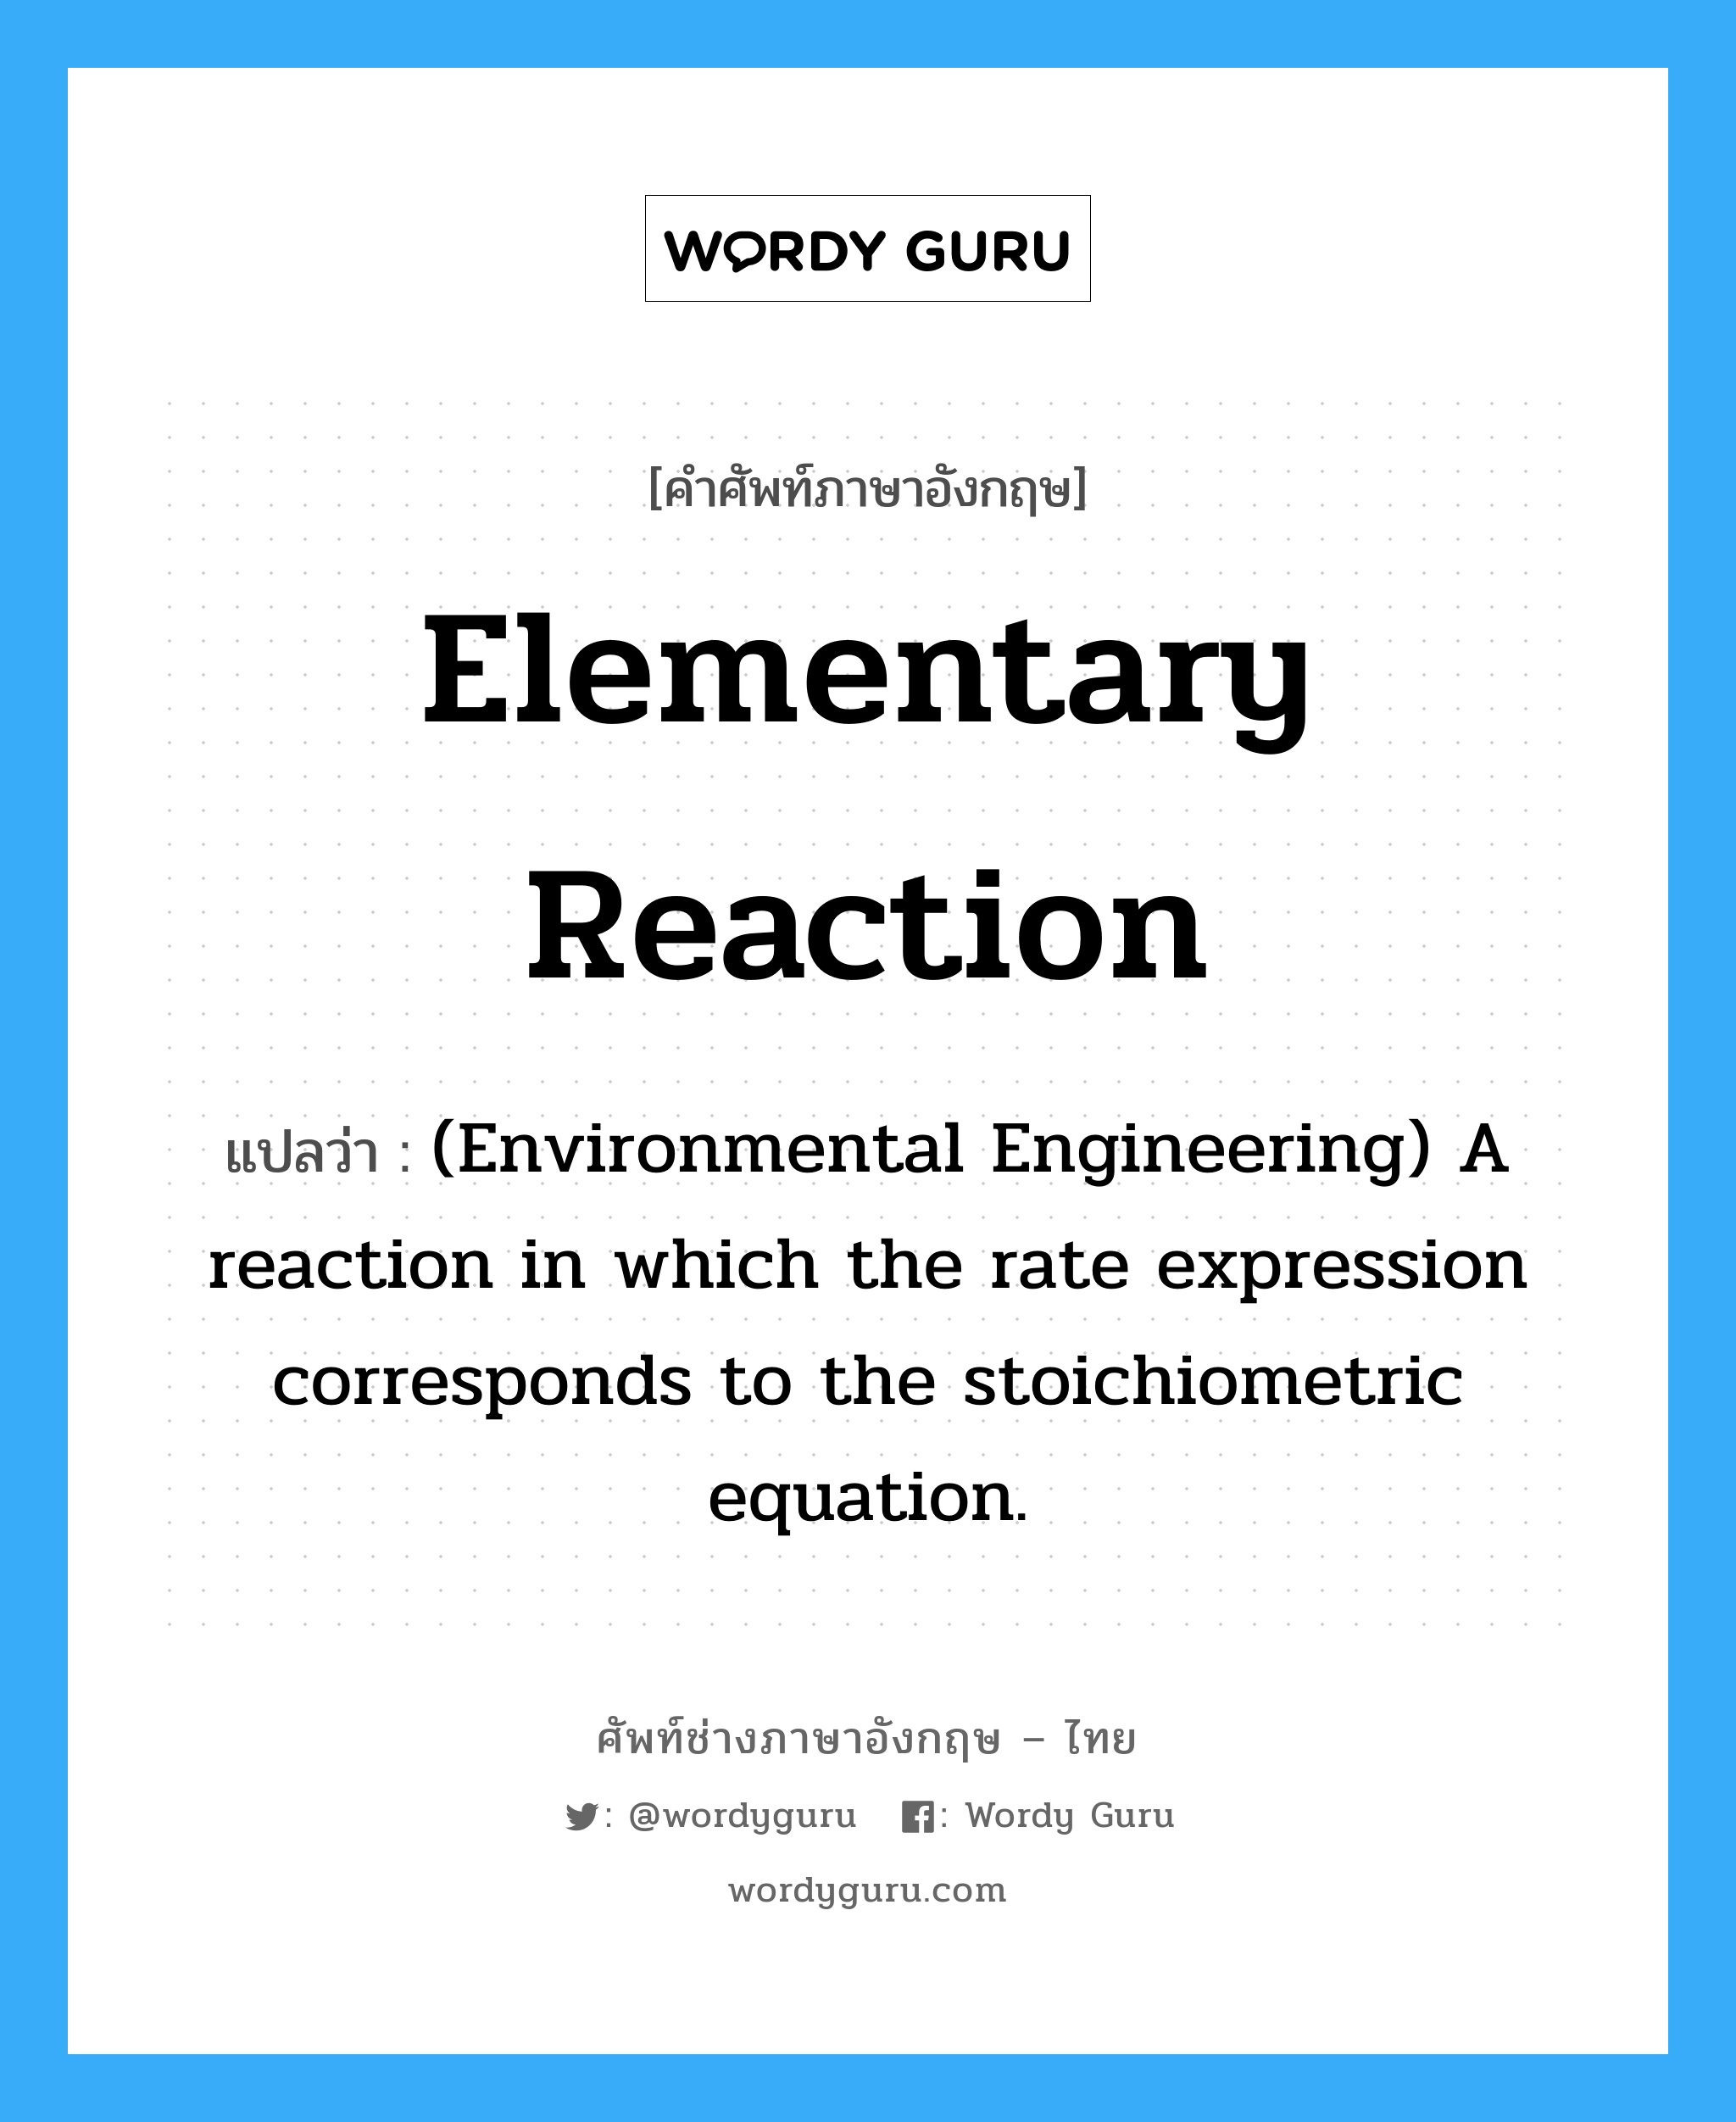 Elementary reaction แปลว่า?, คำศัพท์ช่างภาษาอังกฤษ - ไทย Elementary reaction คำศัพท์ภาษาอังกฤษ Elementary reaction แปลว่า (Environmental Engineering) A reaction in which the rate expression corresponds to the stoichiometric equation.